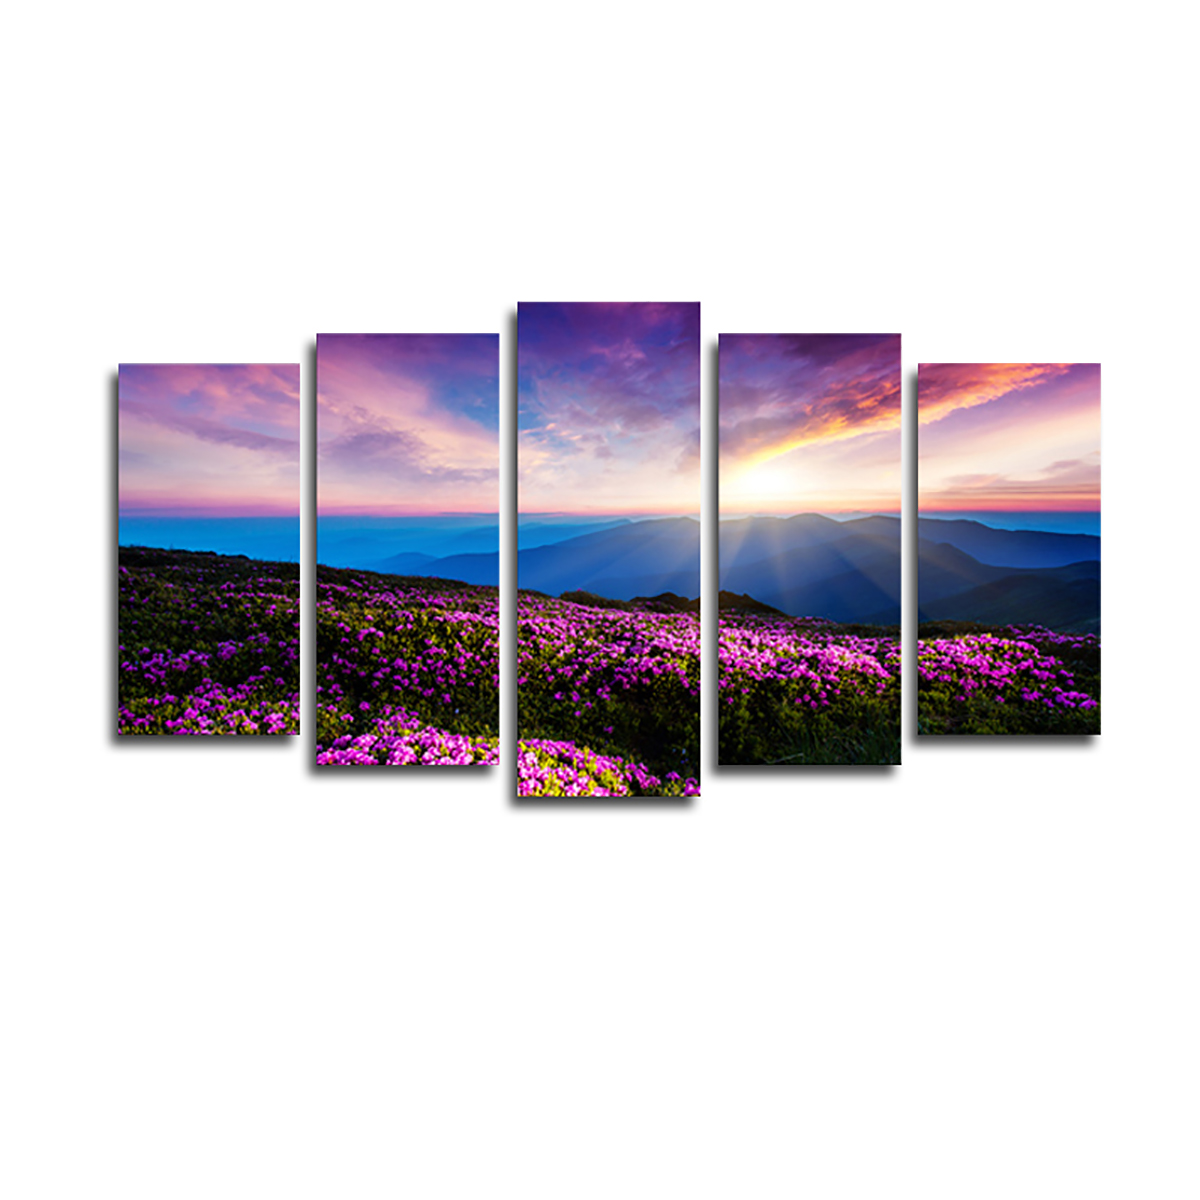 5Pcs-Canvas-Print-Paintings-Scenery-Oil-Painting-Wall-Decorative-Printing-Art-Picture-Frameless-Home-1758668-20